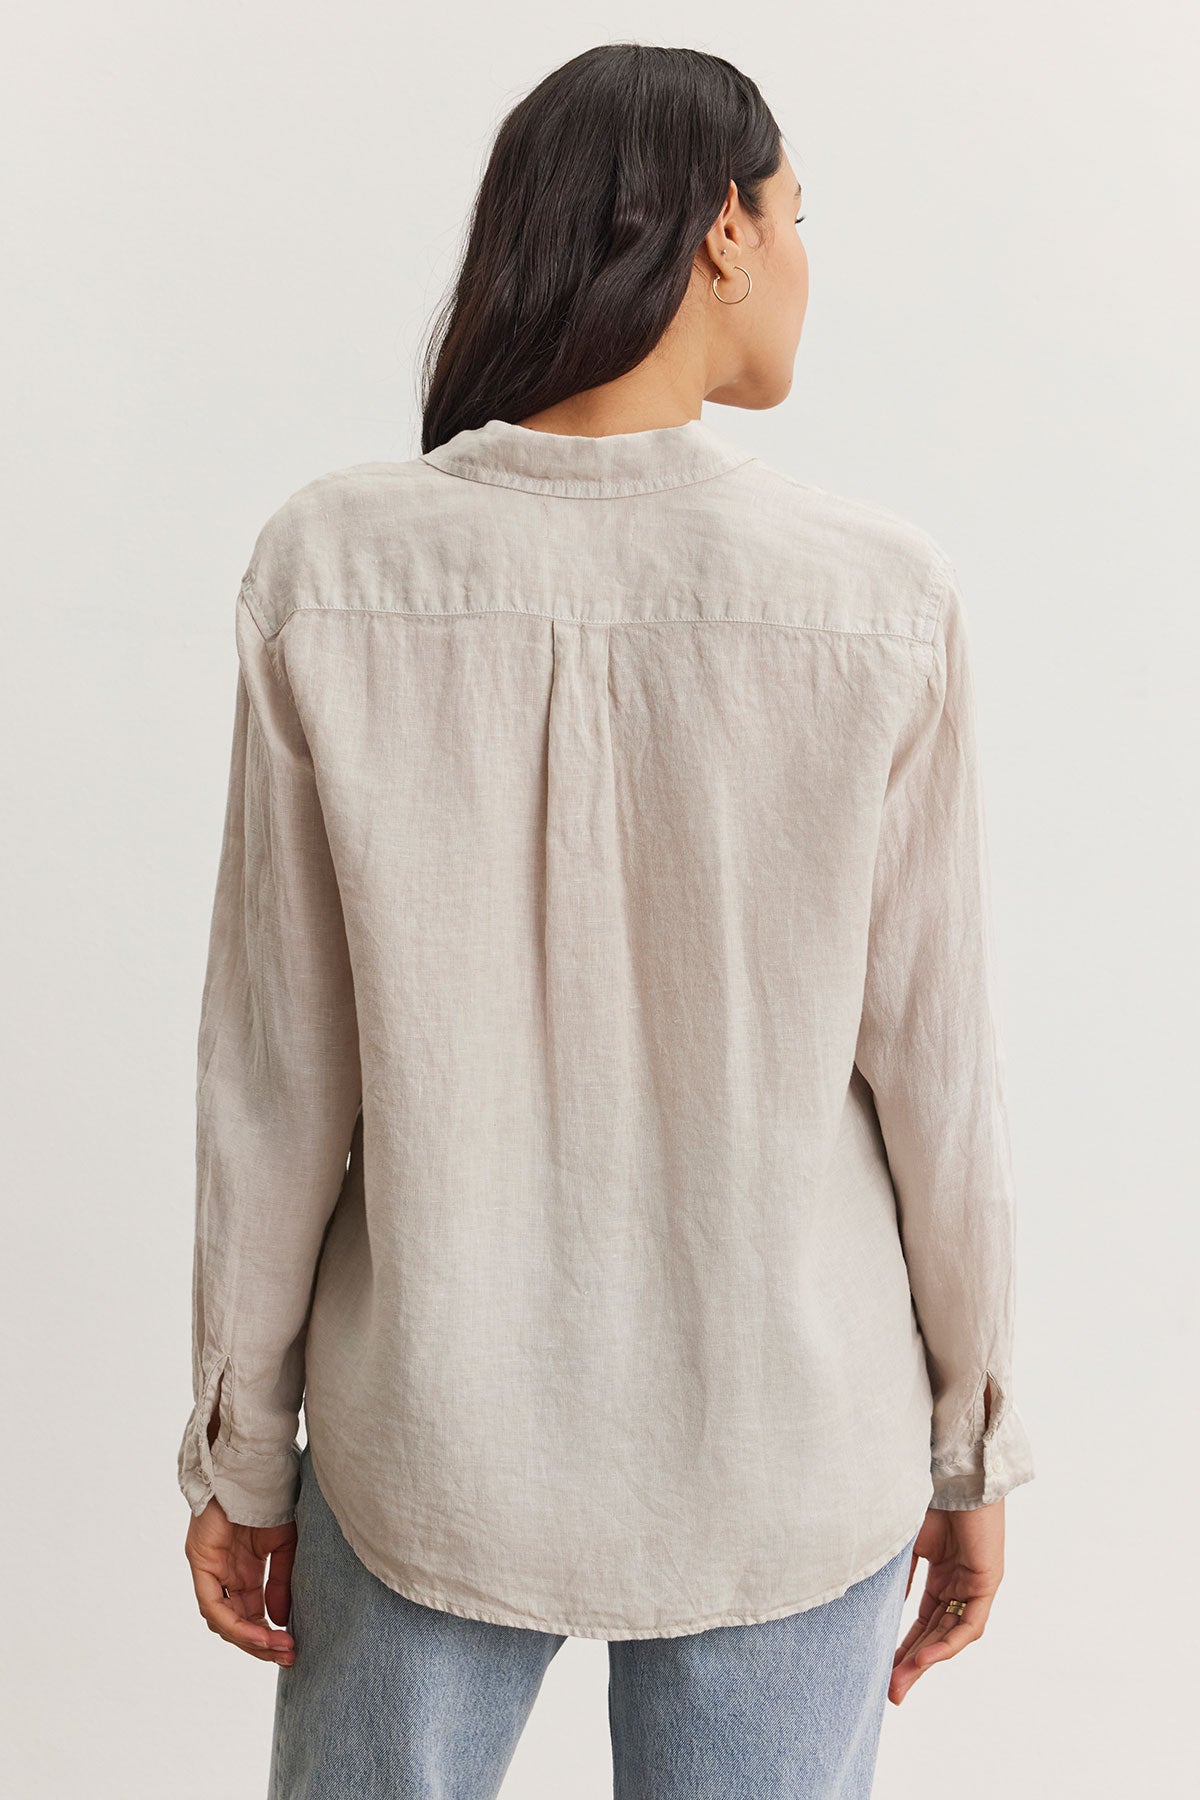 Woman standing facing away, wearing a Velvet by Graham & Spencer Willow Linen Button-Up Shirt and blue jeans, with her long dark hair draped over one shoulder.-36998739132609